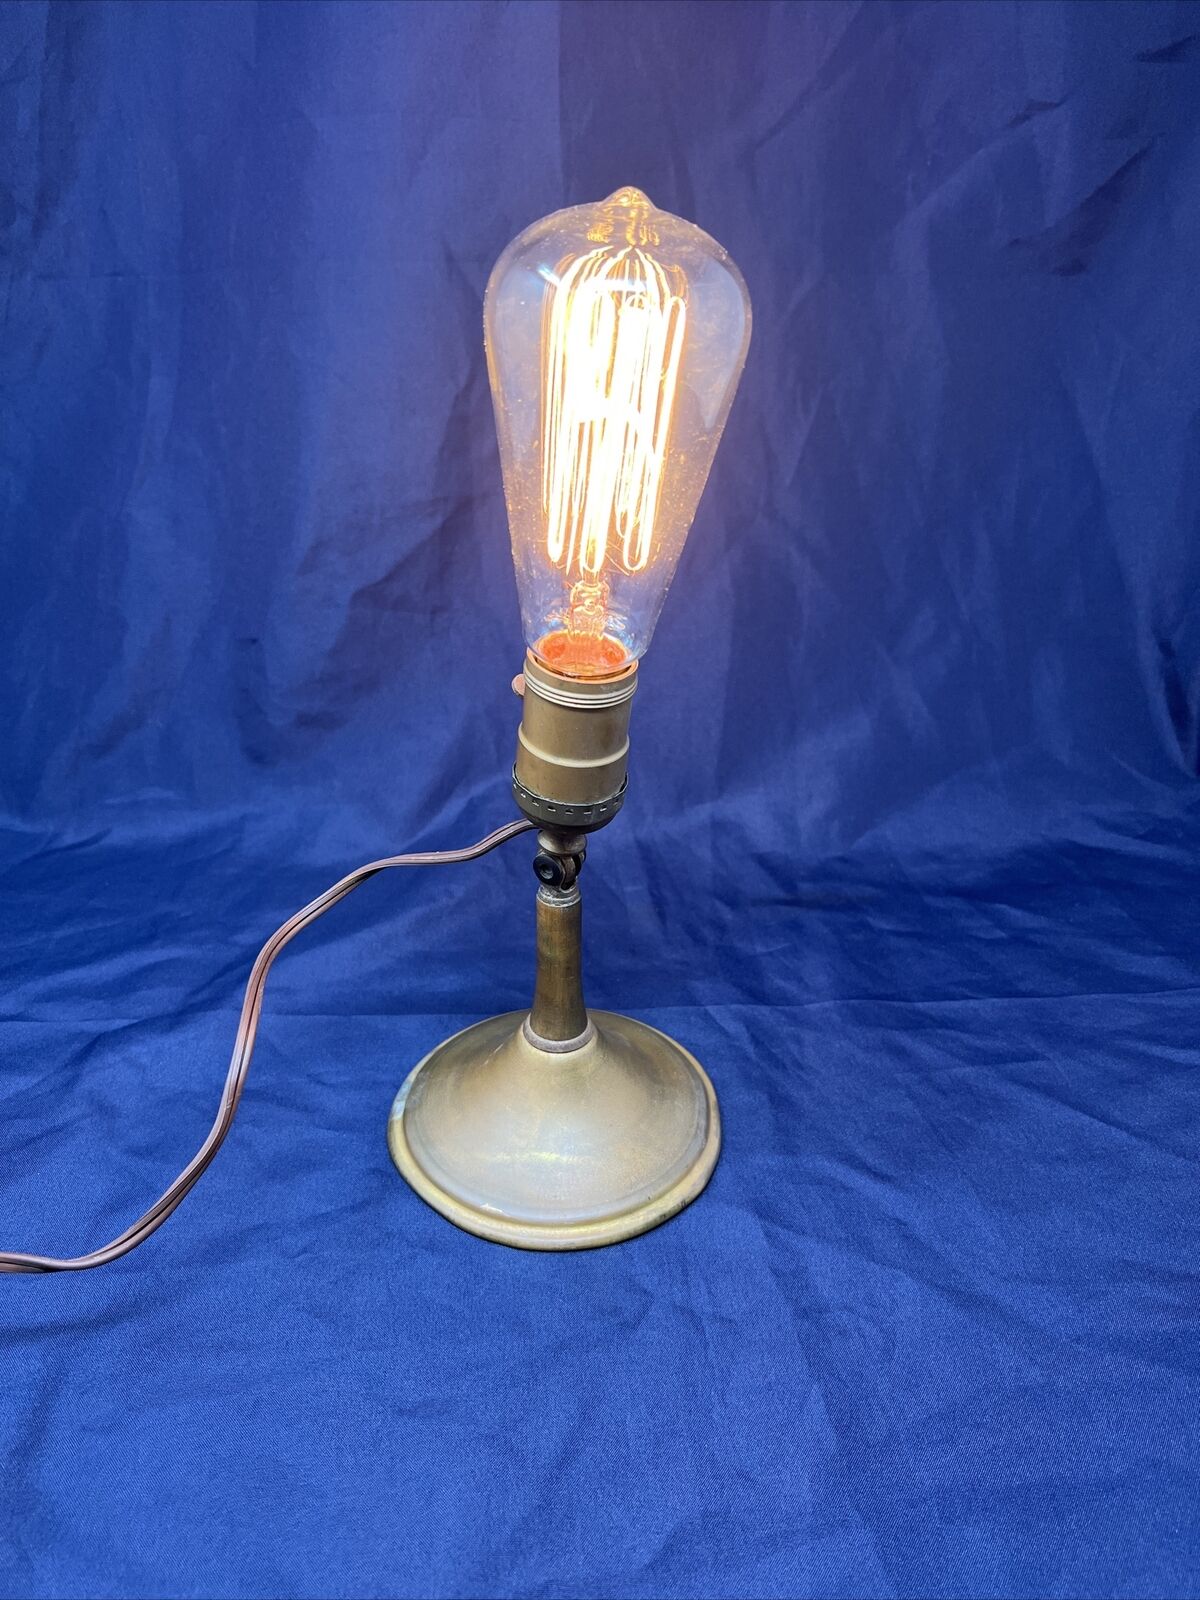 Antique Greist Industrial Small Lamp Adjustable Clip-On Wall Light WORKS